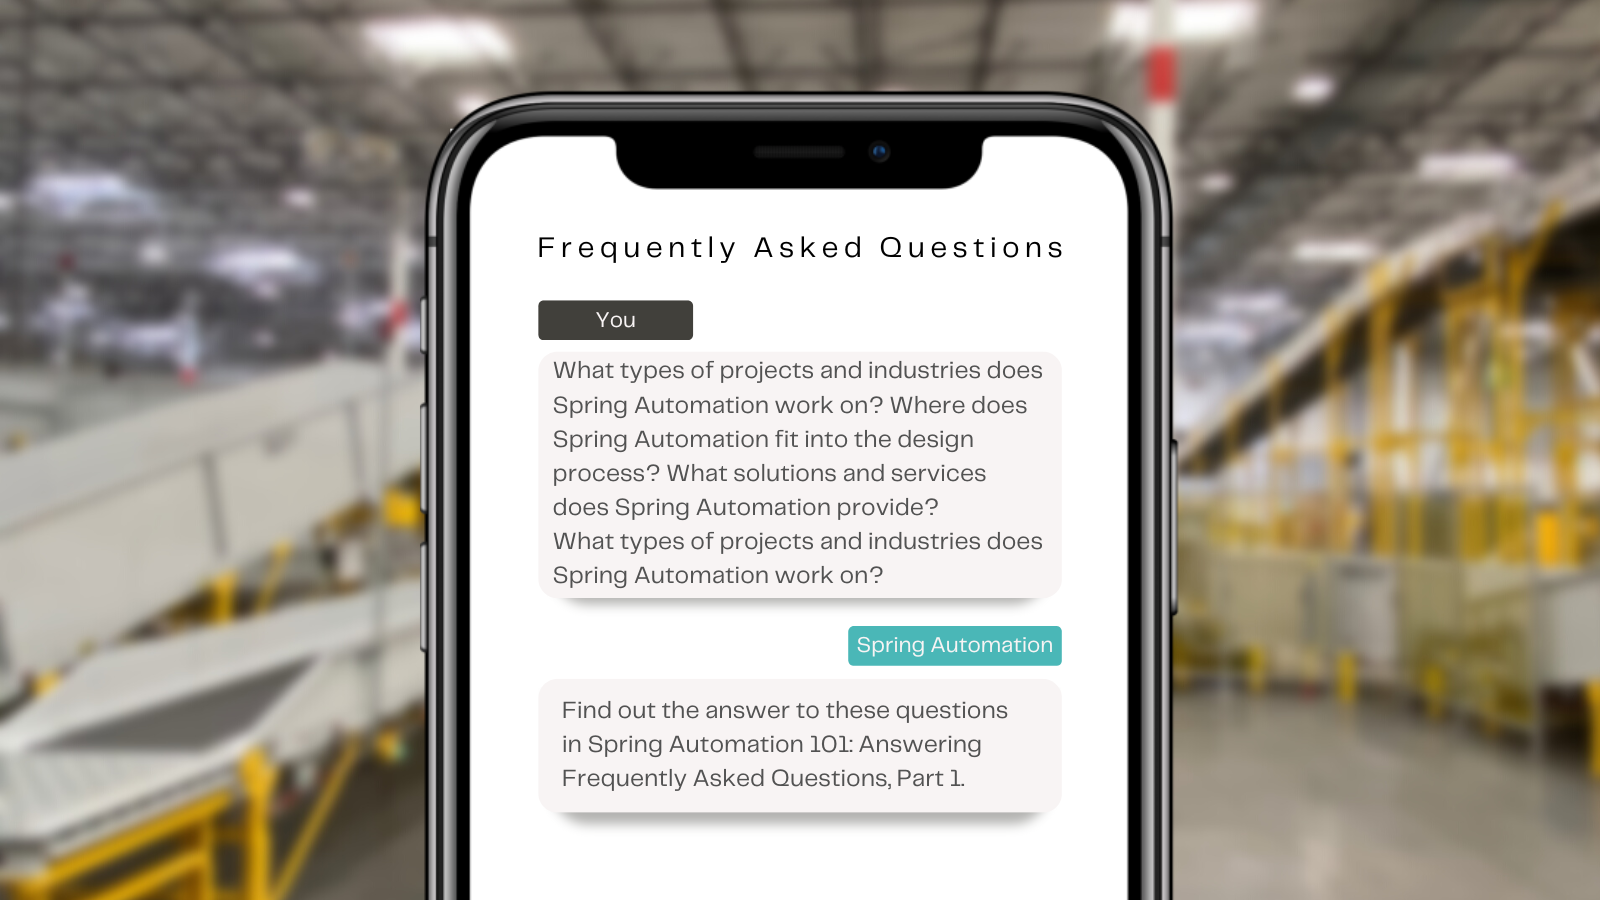 Spring Automation 101: Answering Frequently Asked Questions, Part 1